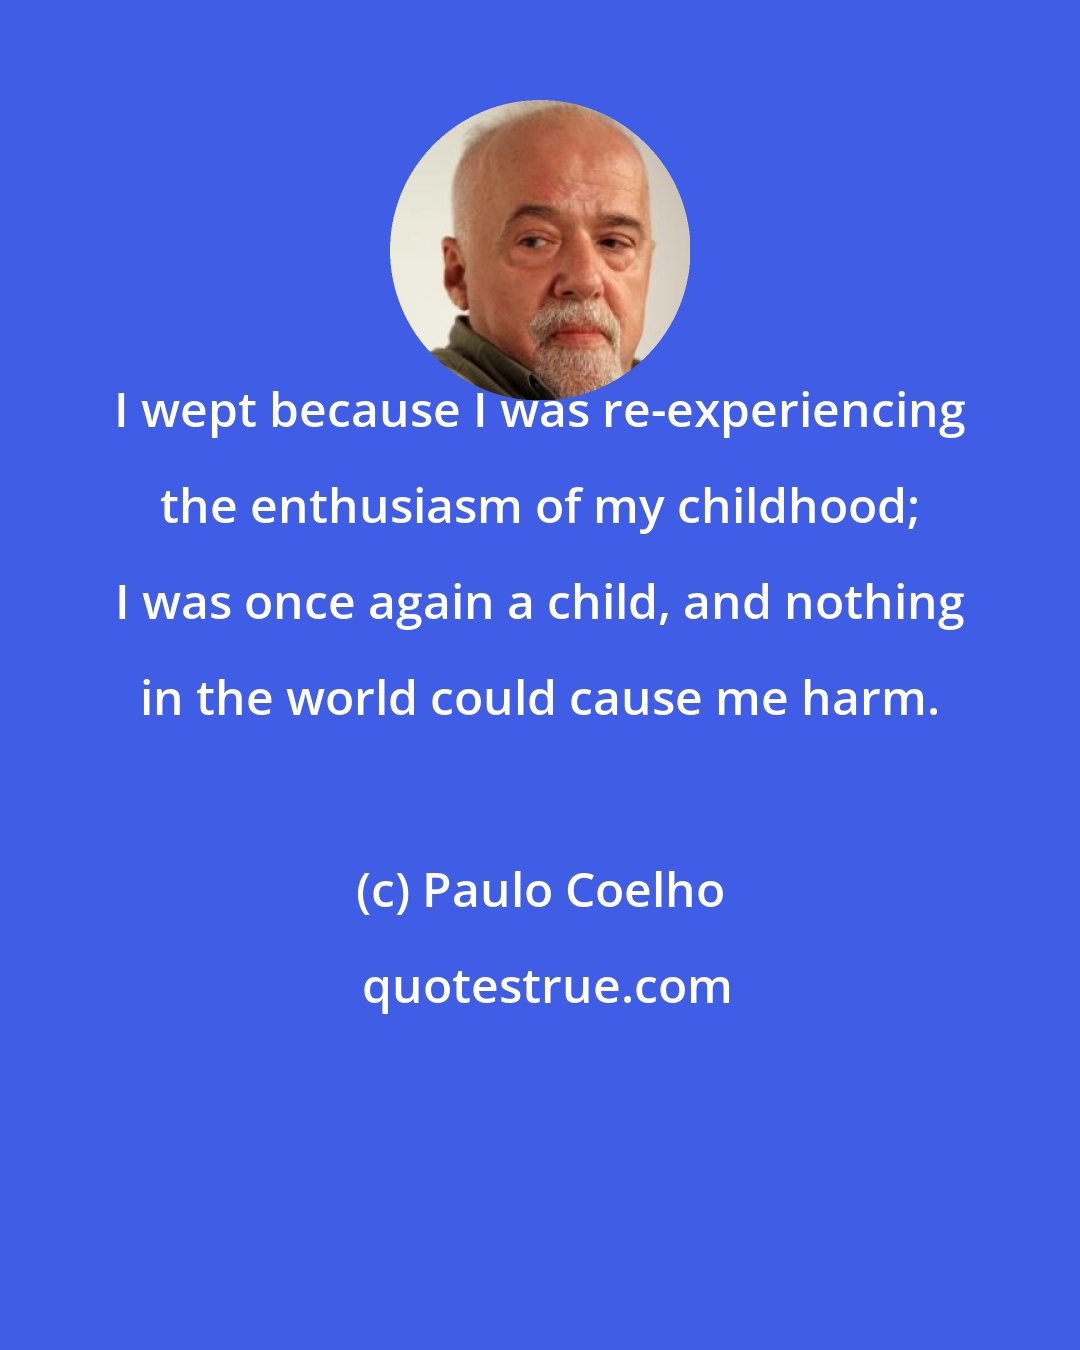 Paulo Coelho: I wept because I was re-experiencing the enthusiasm of my childhood; I was once again a child, and nothing in the world could cause me harm.